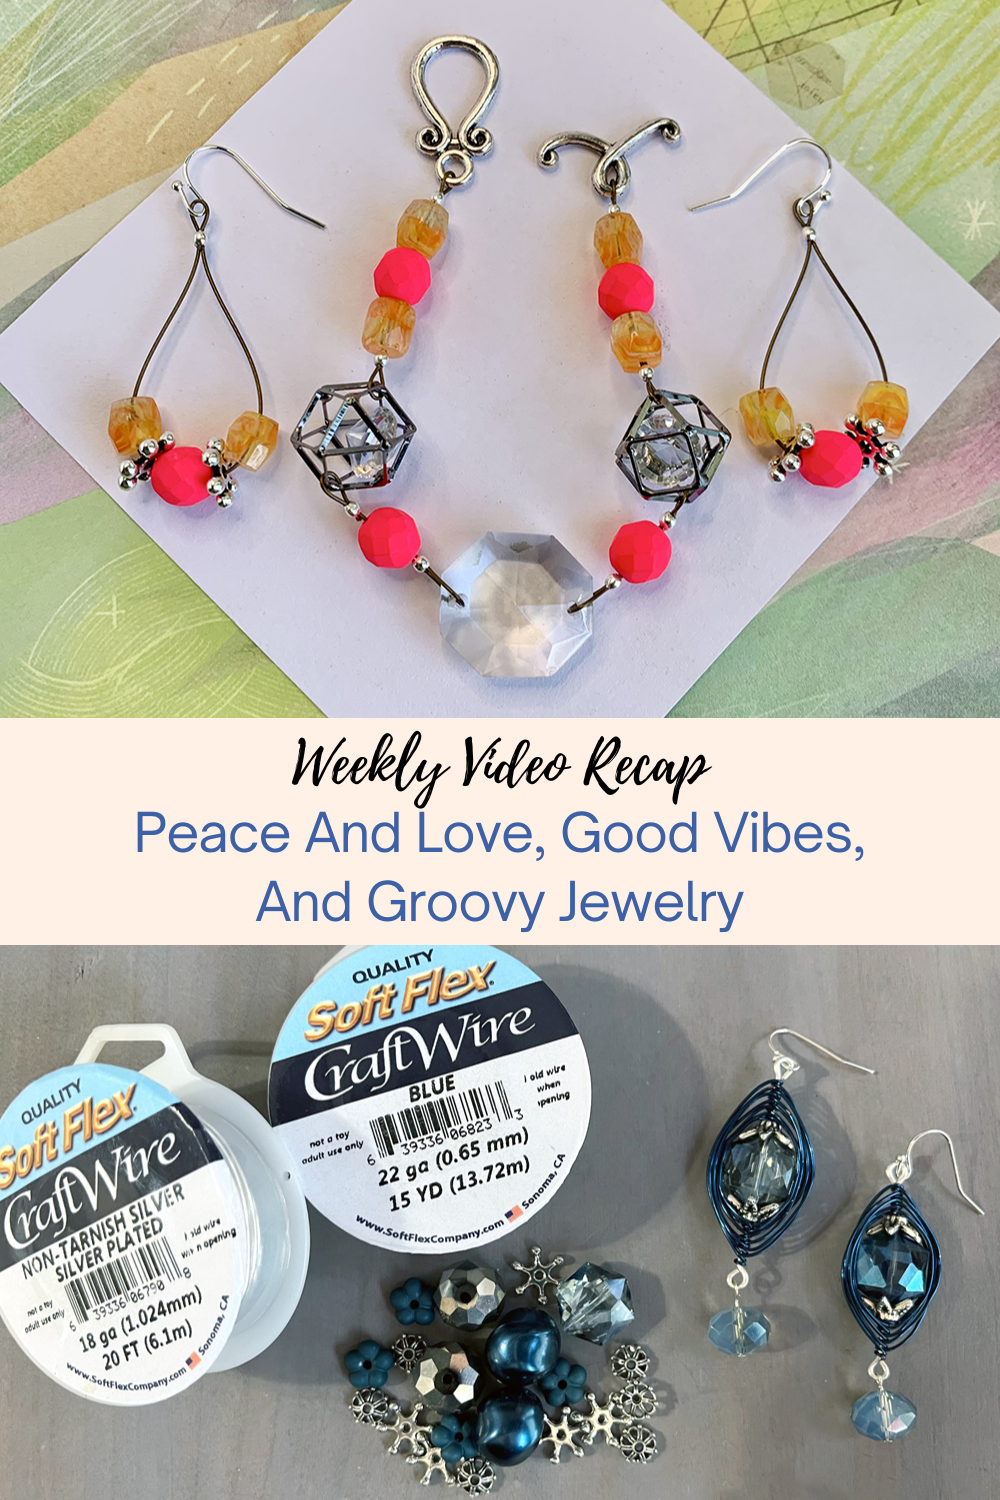 Peace And Love, Good Vibes, And Groovy Jewelry Collage